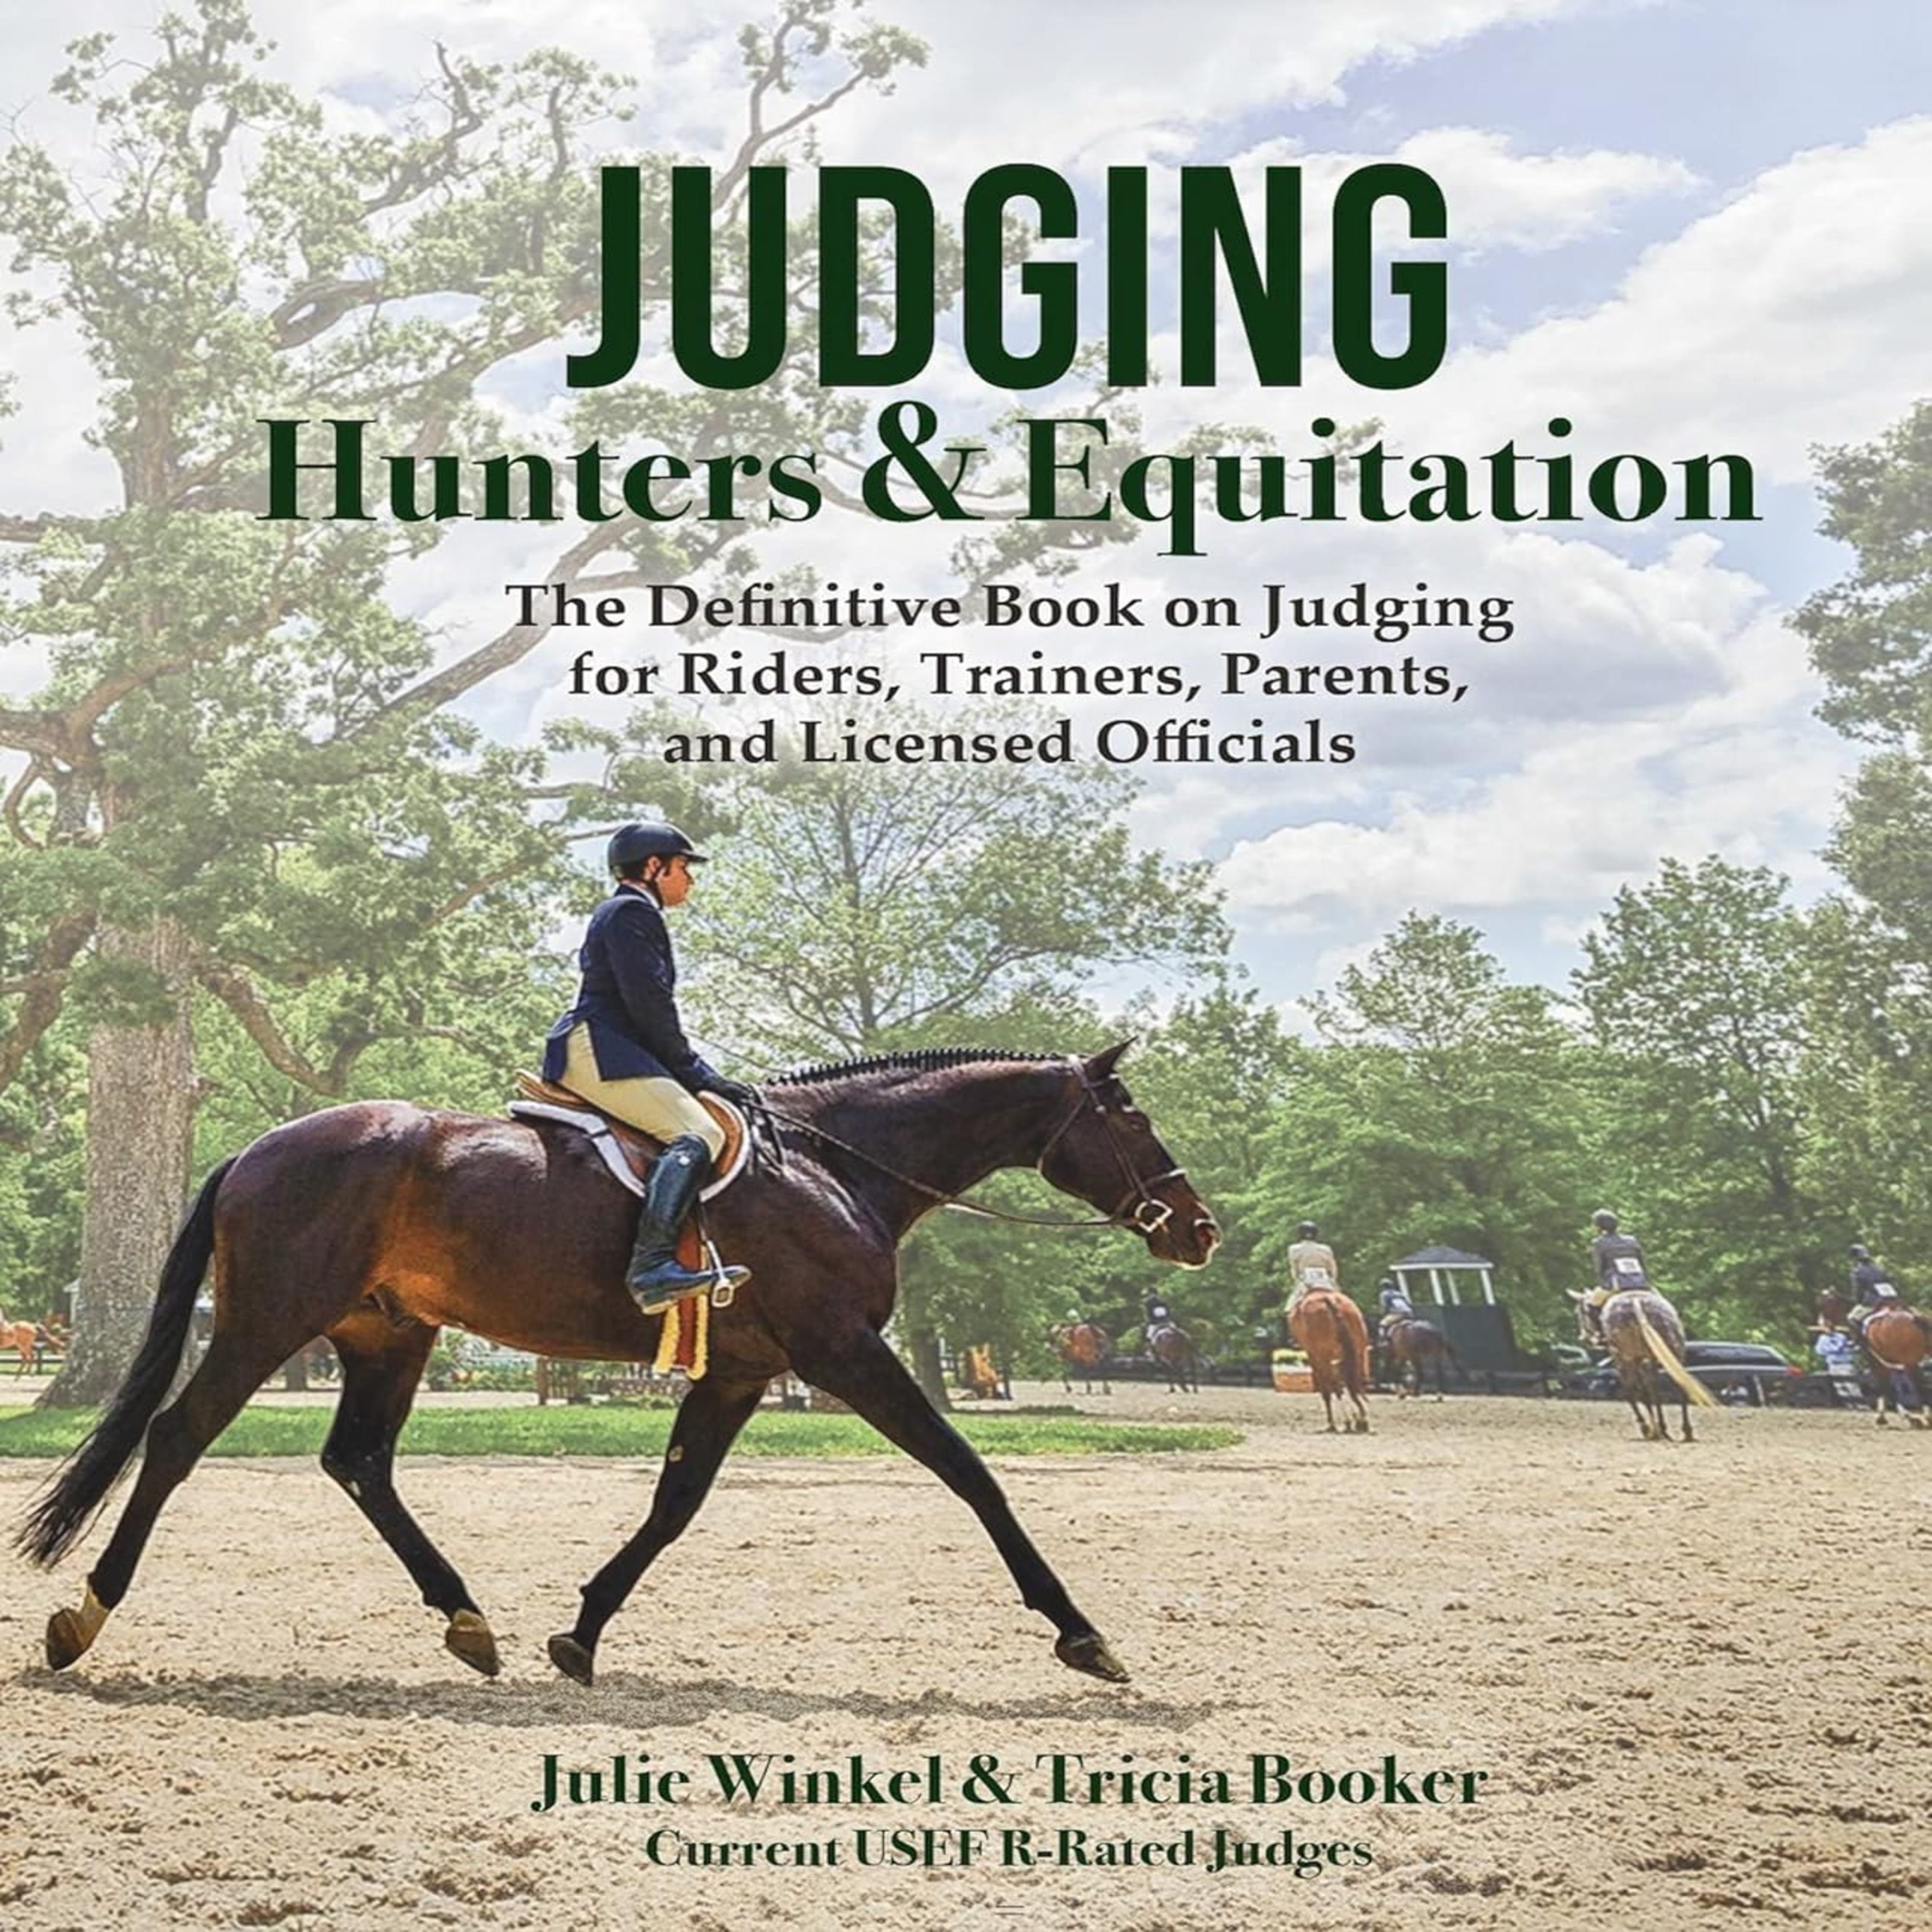 Judging Hunters and Equitation WTF (Want The facts?)